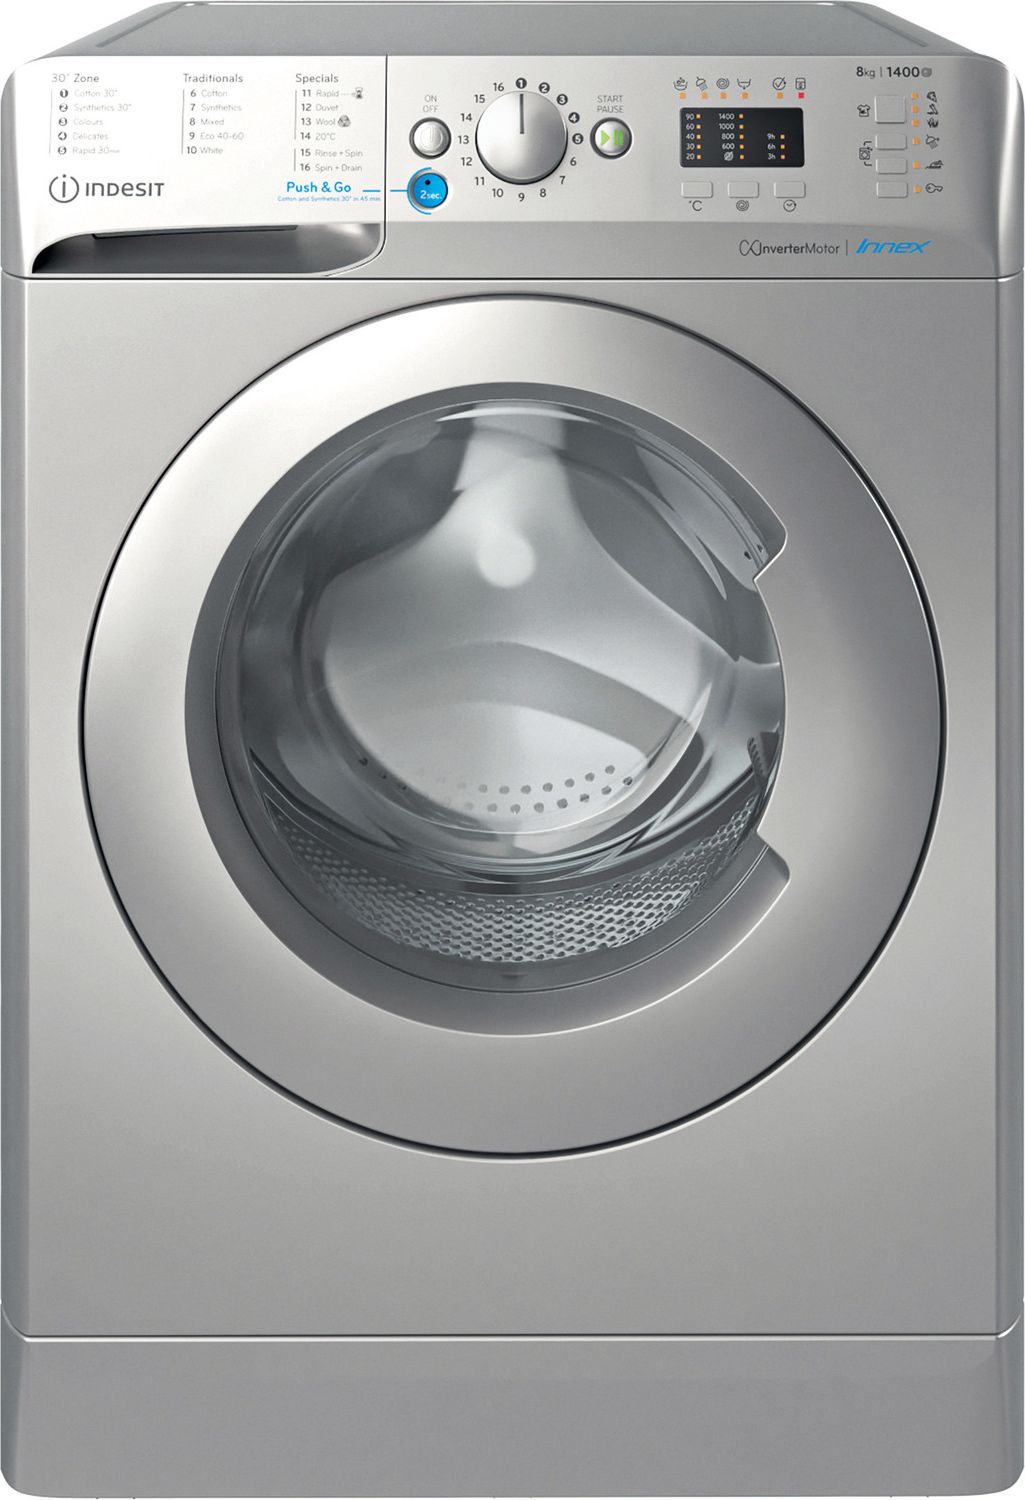 Indesit BWA81485XSUKN 8kg Washing Machine with 1400 rpm - Silver - B Rated, Silver